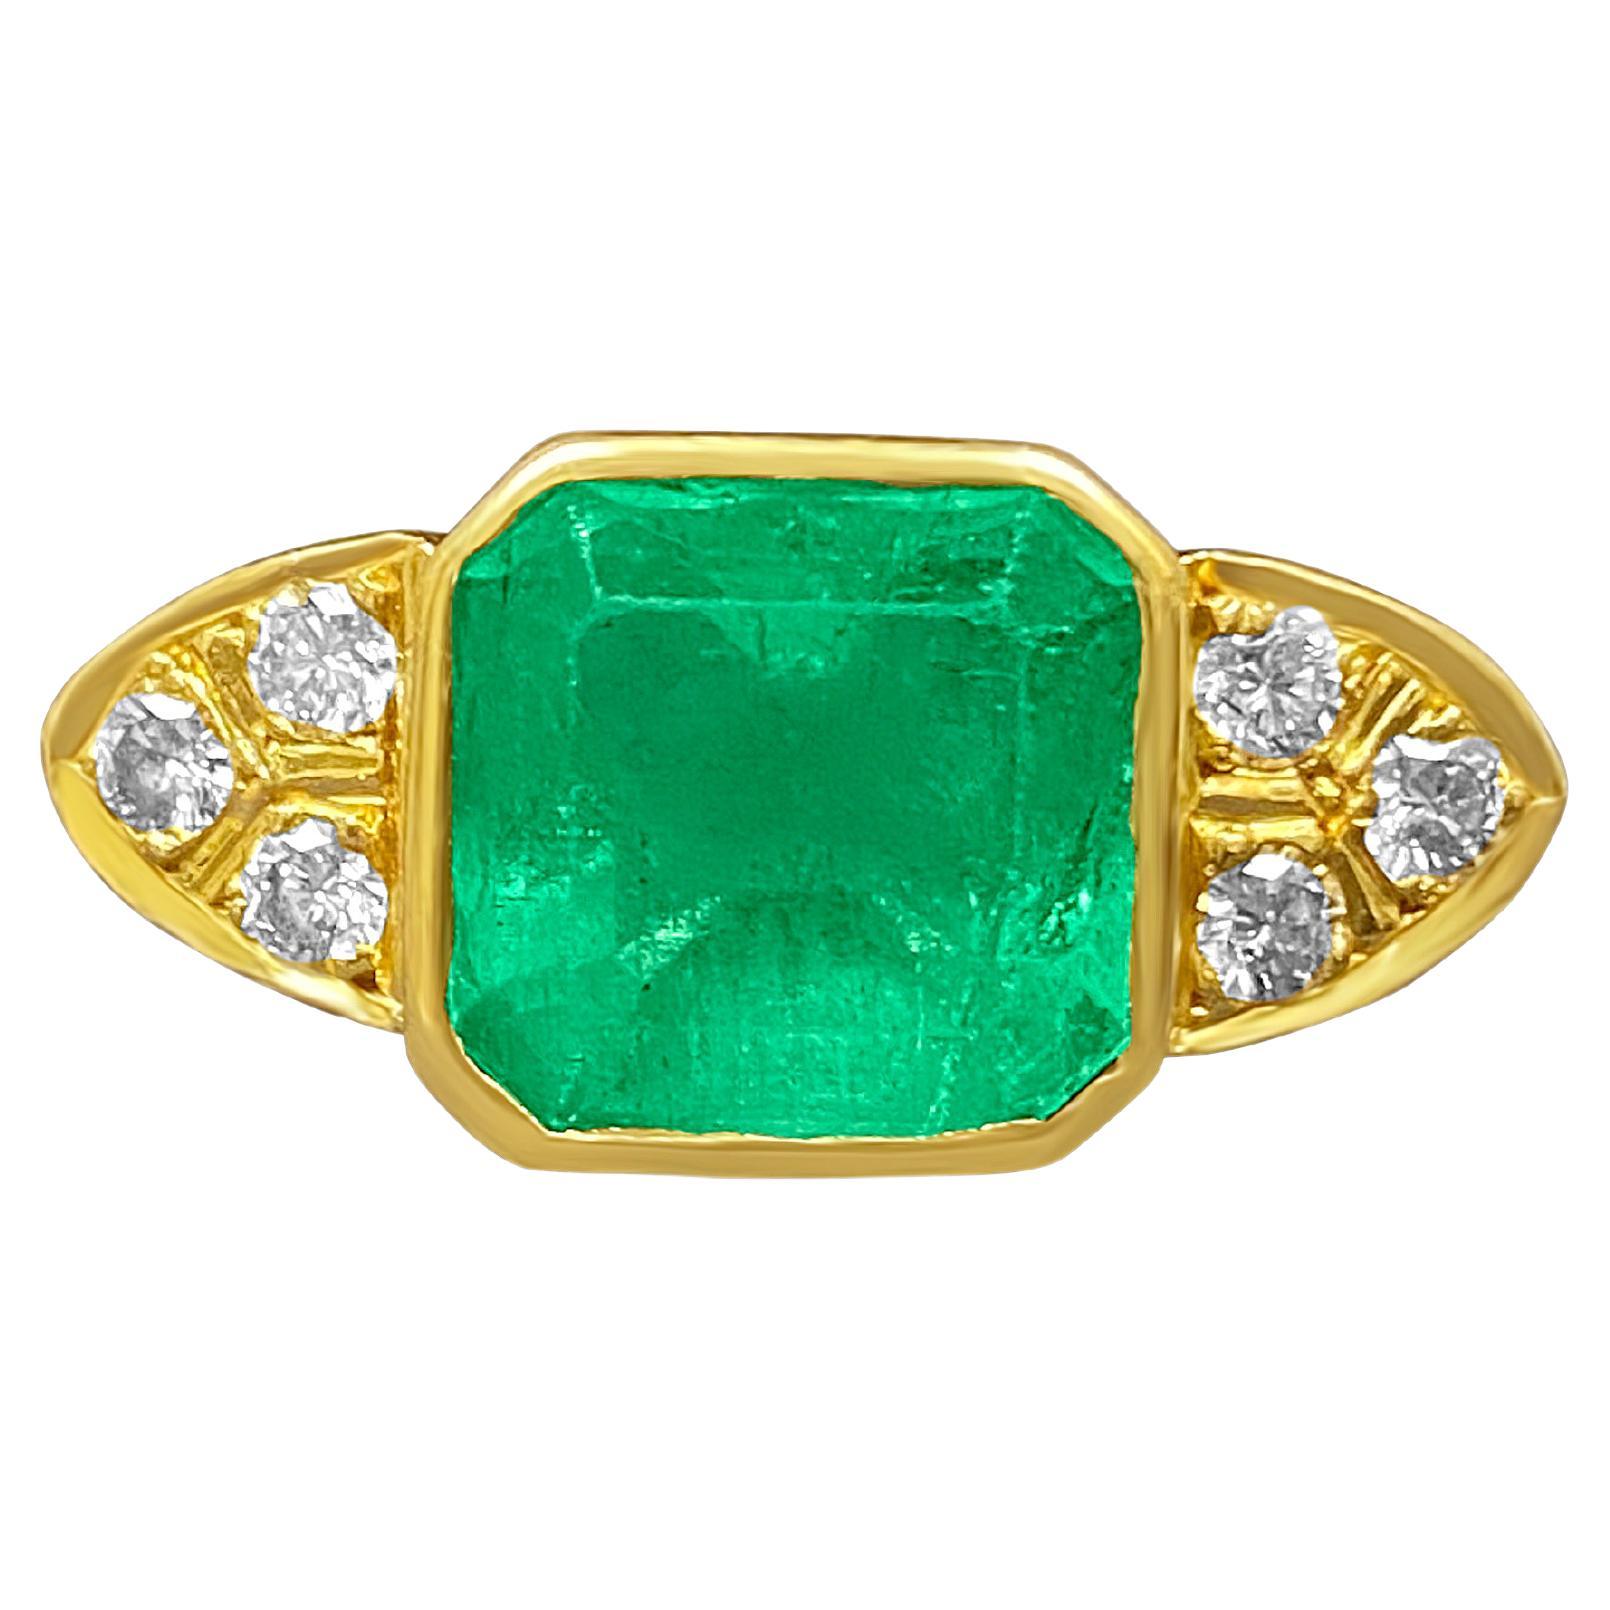 4.50 Carat Bezel Set Emerald and Diamond Cocktail Ring in 18k Solid Gold